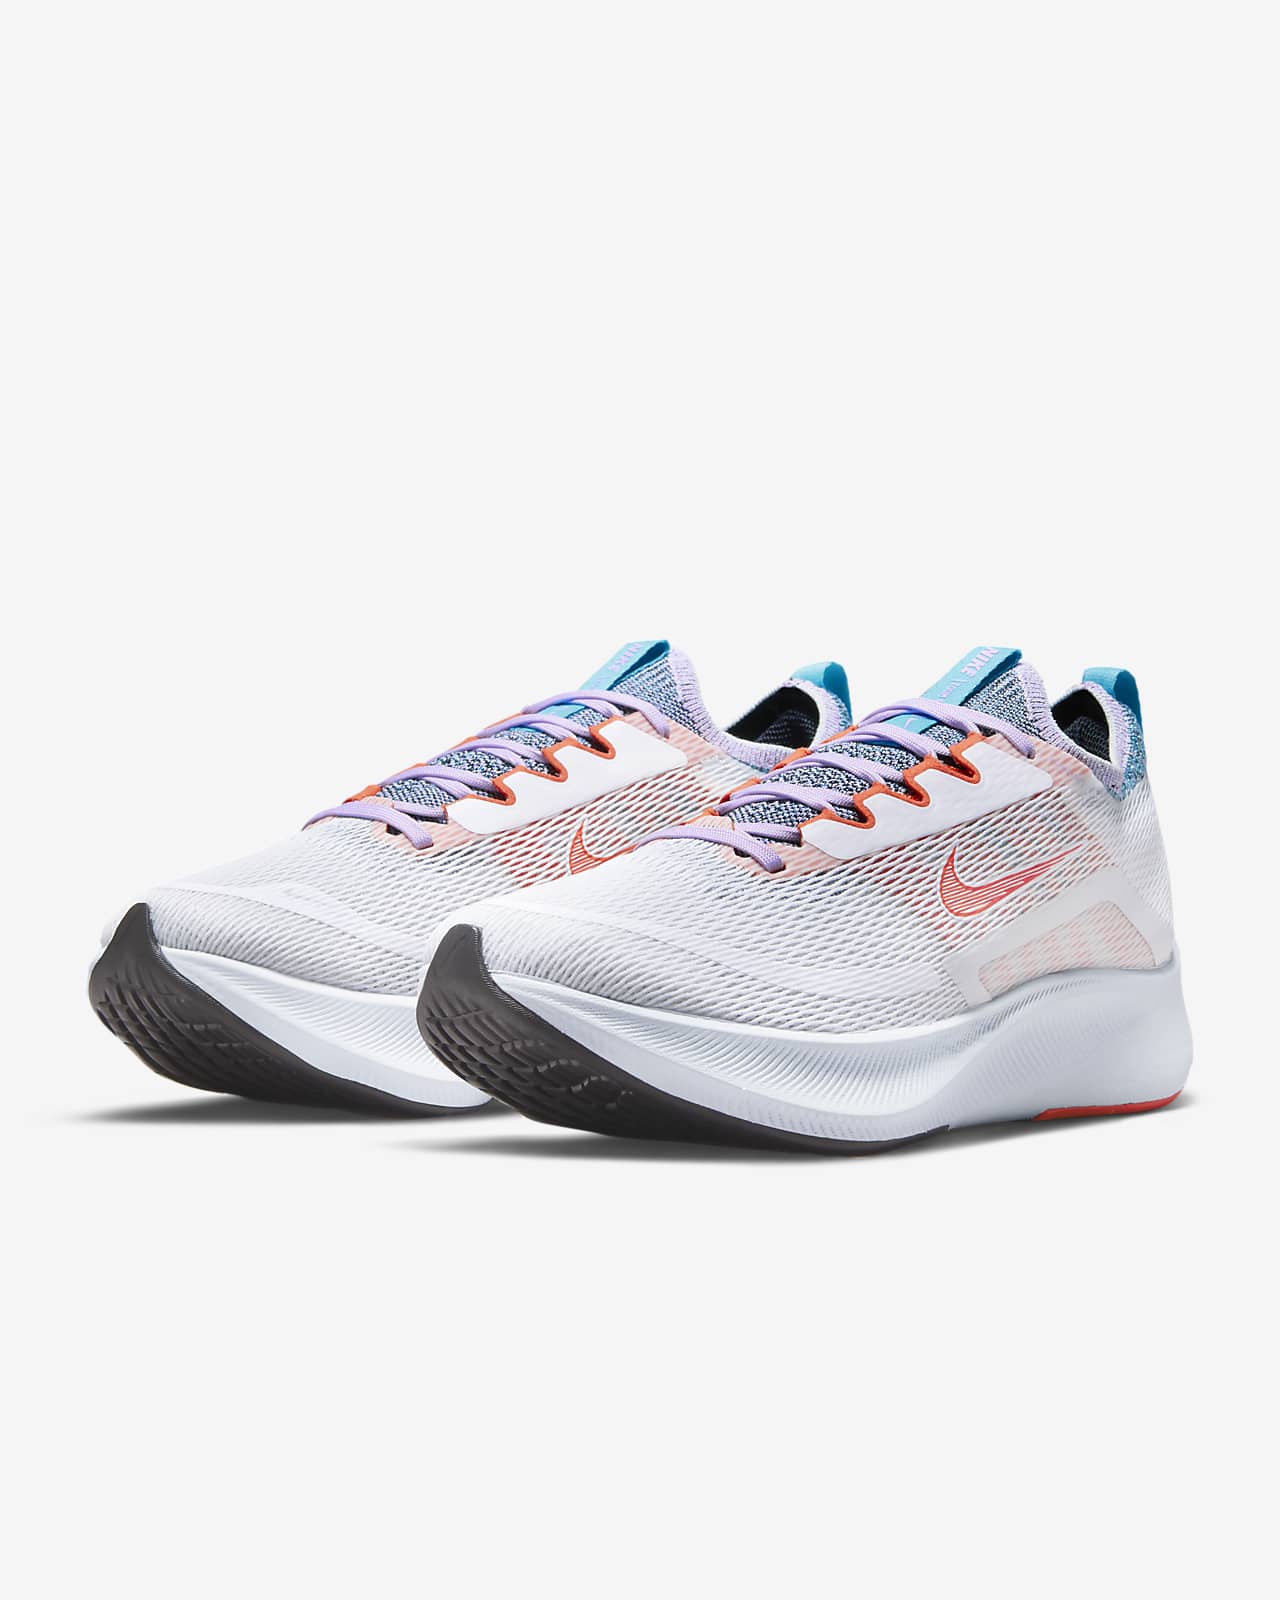 Nike Zoom Fly 4 Women's Road Running Shoes